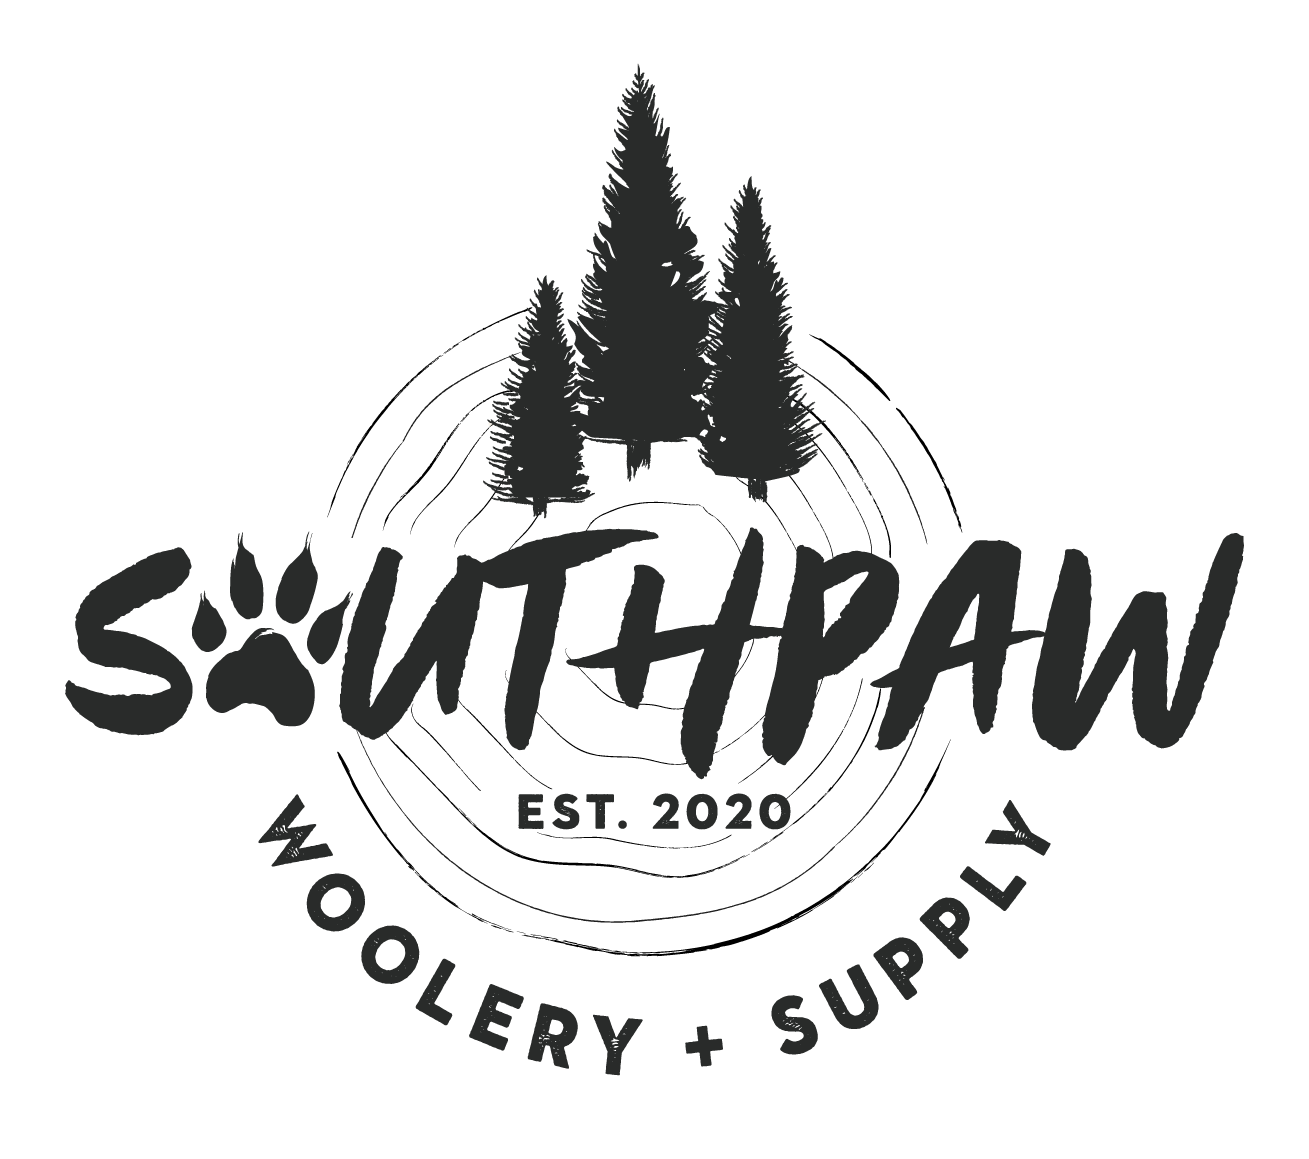 Southpaw Woolery & Supply